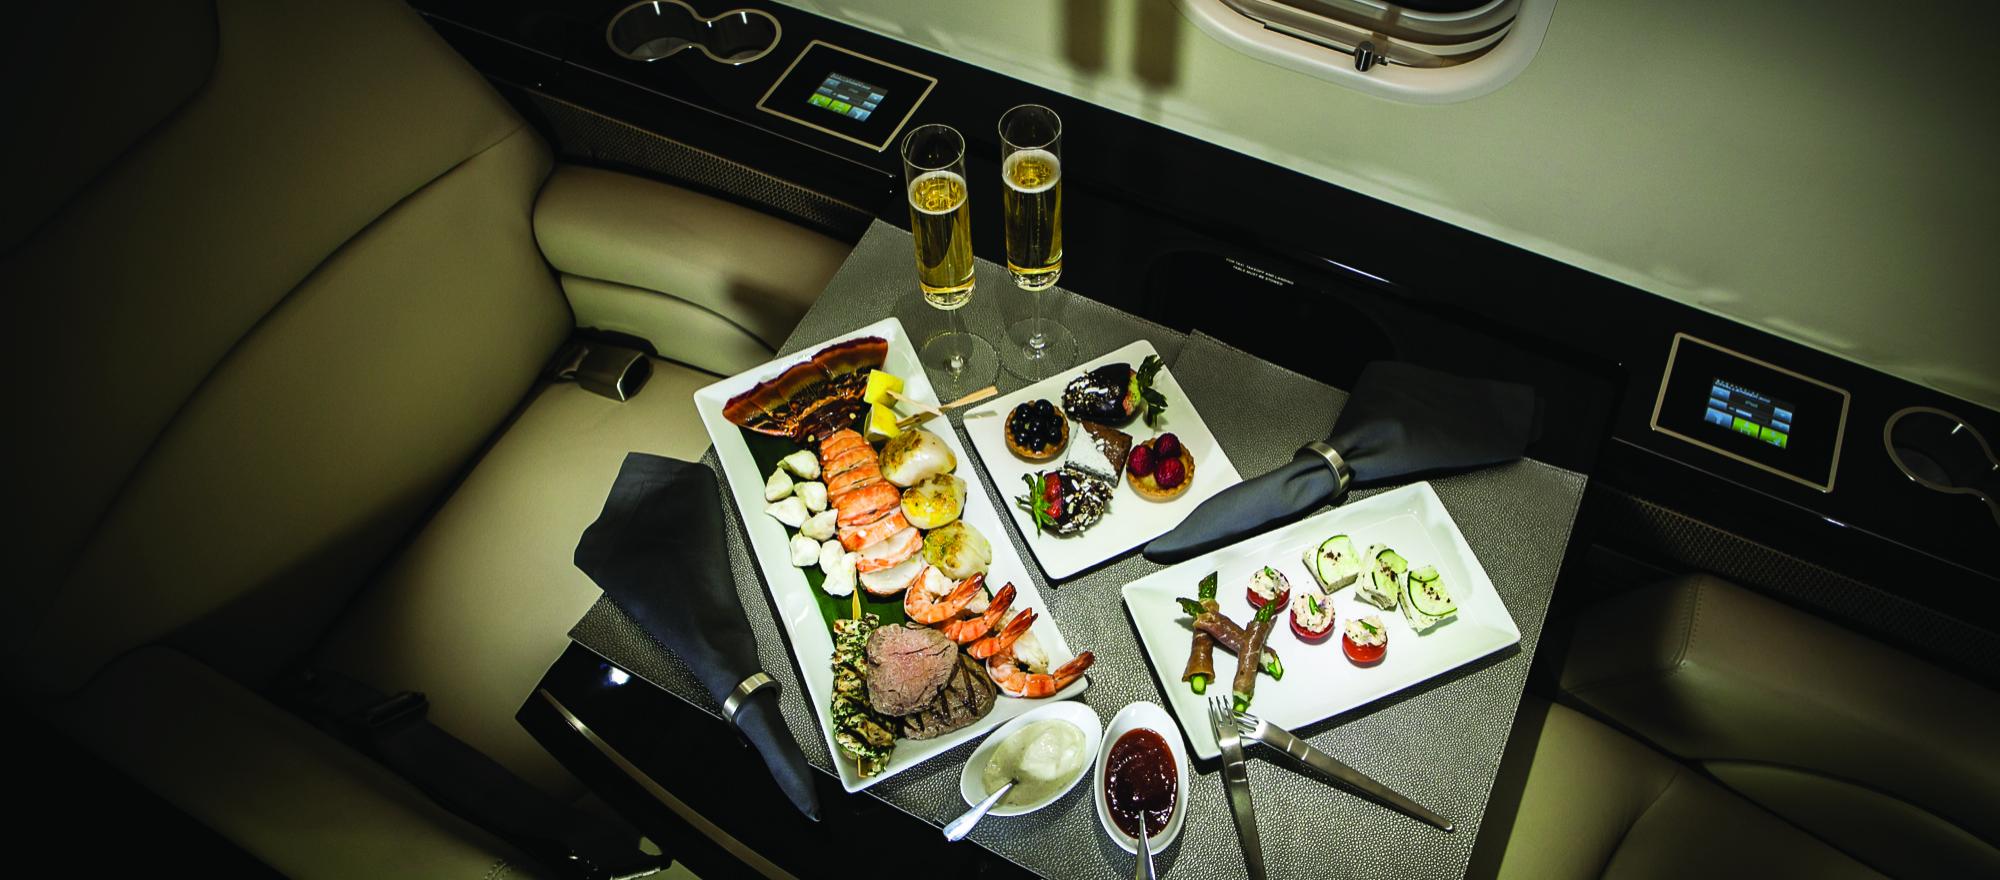 Food offerings from business aviation caterers mirror those found at top gourmet restaurants, but simpler fare such as burgers and sandwiches are also common. (Photo: Cunningham Photo Artists/Chef Charles Catering)